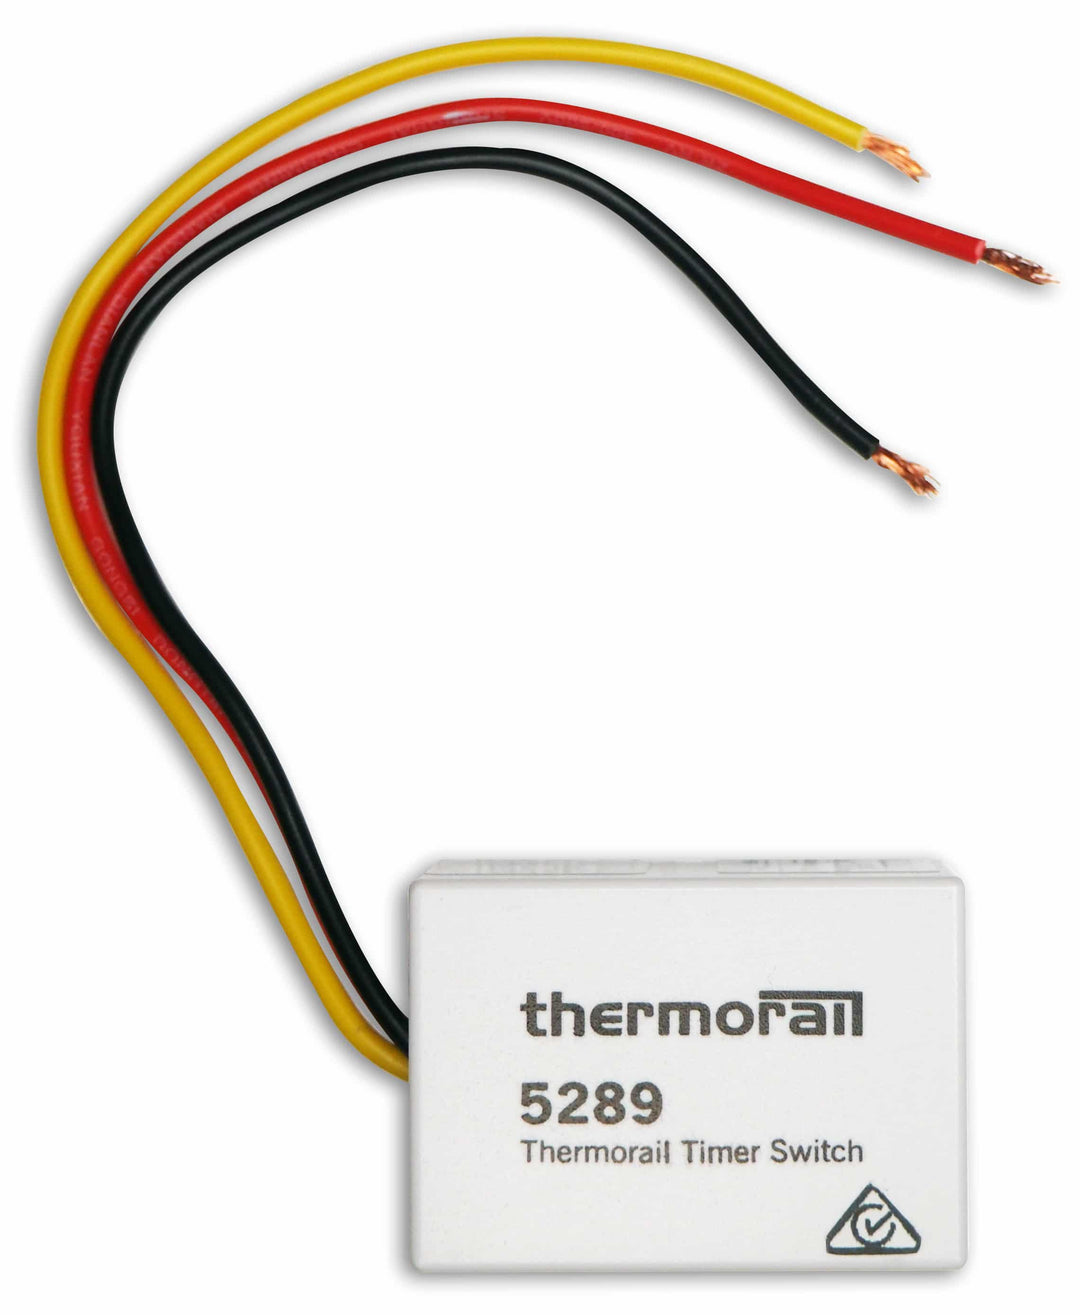 Thermorail Eco Timer - Timer Only (Excludes Face Plate)